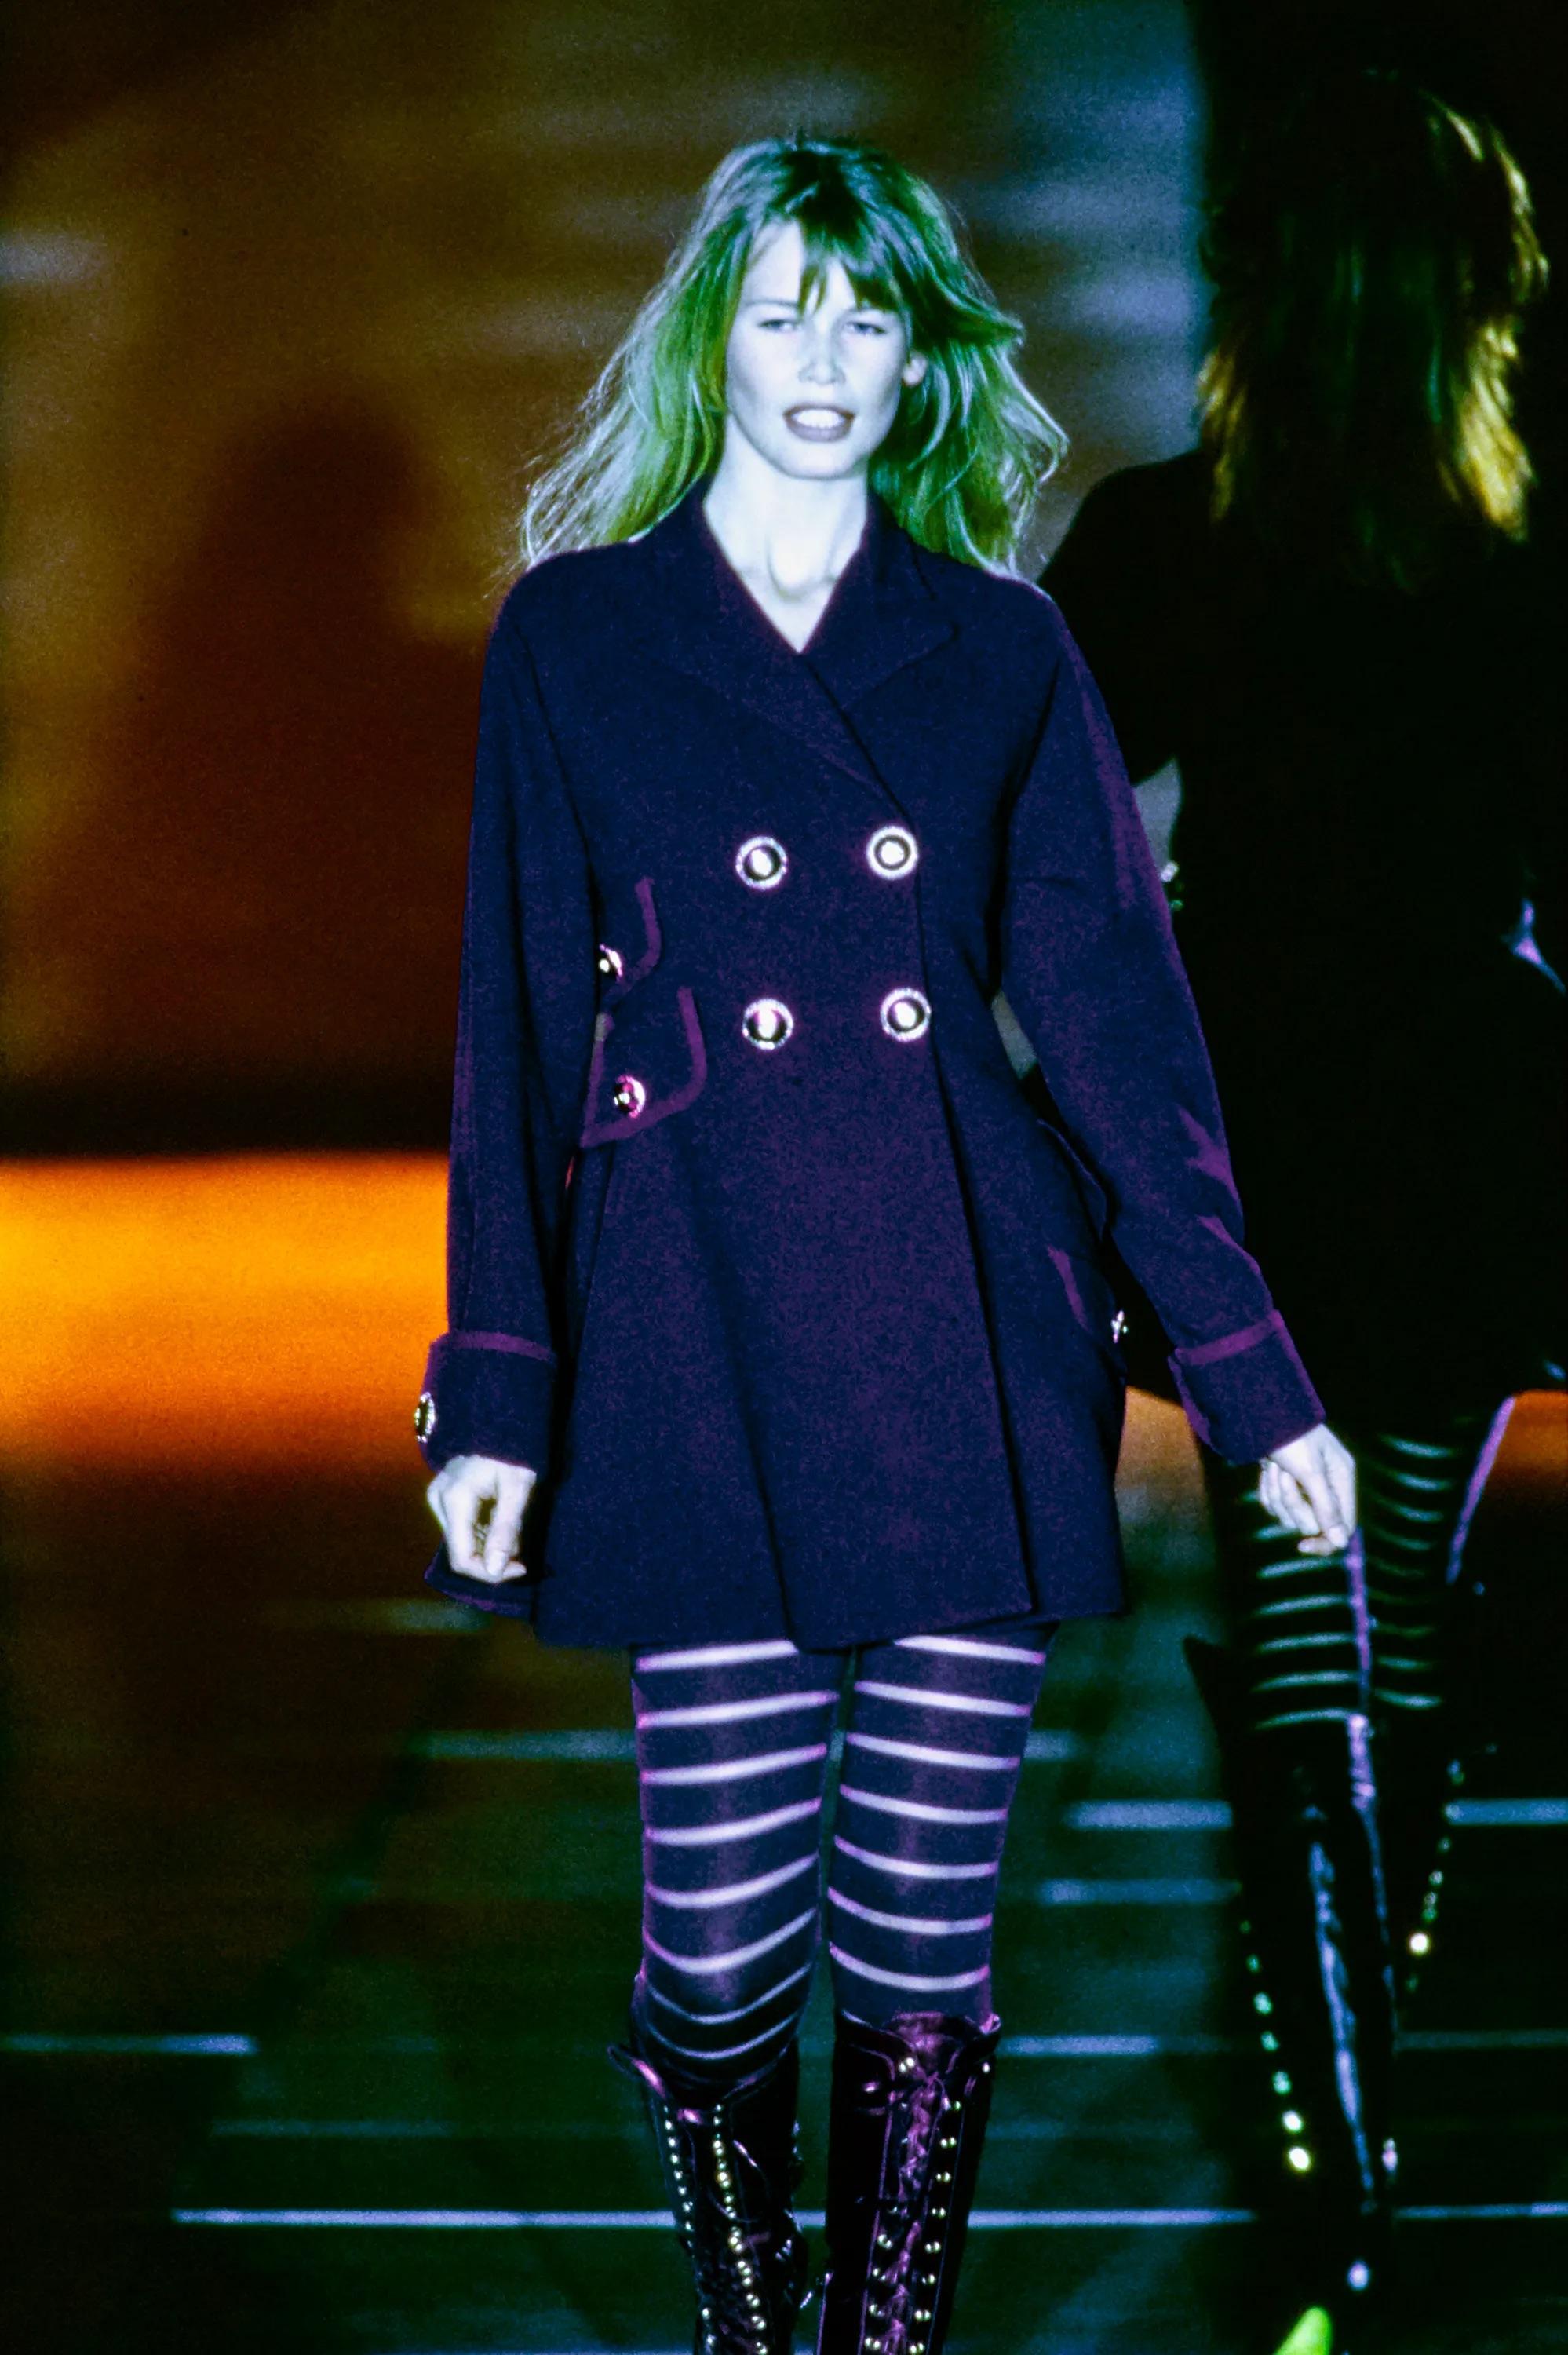 Presenting a pair of of purple Gianni Versace footed leggings, designed by Gianni Versace. From the Fall/Winter 1993 collection, these striped leggings debuted on the season's runway as part of look 34, modeled by Claudia Schiffer. These